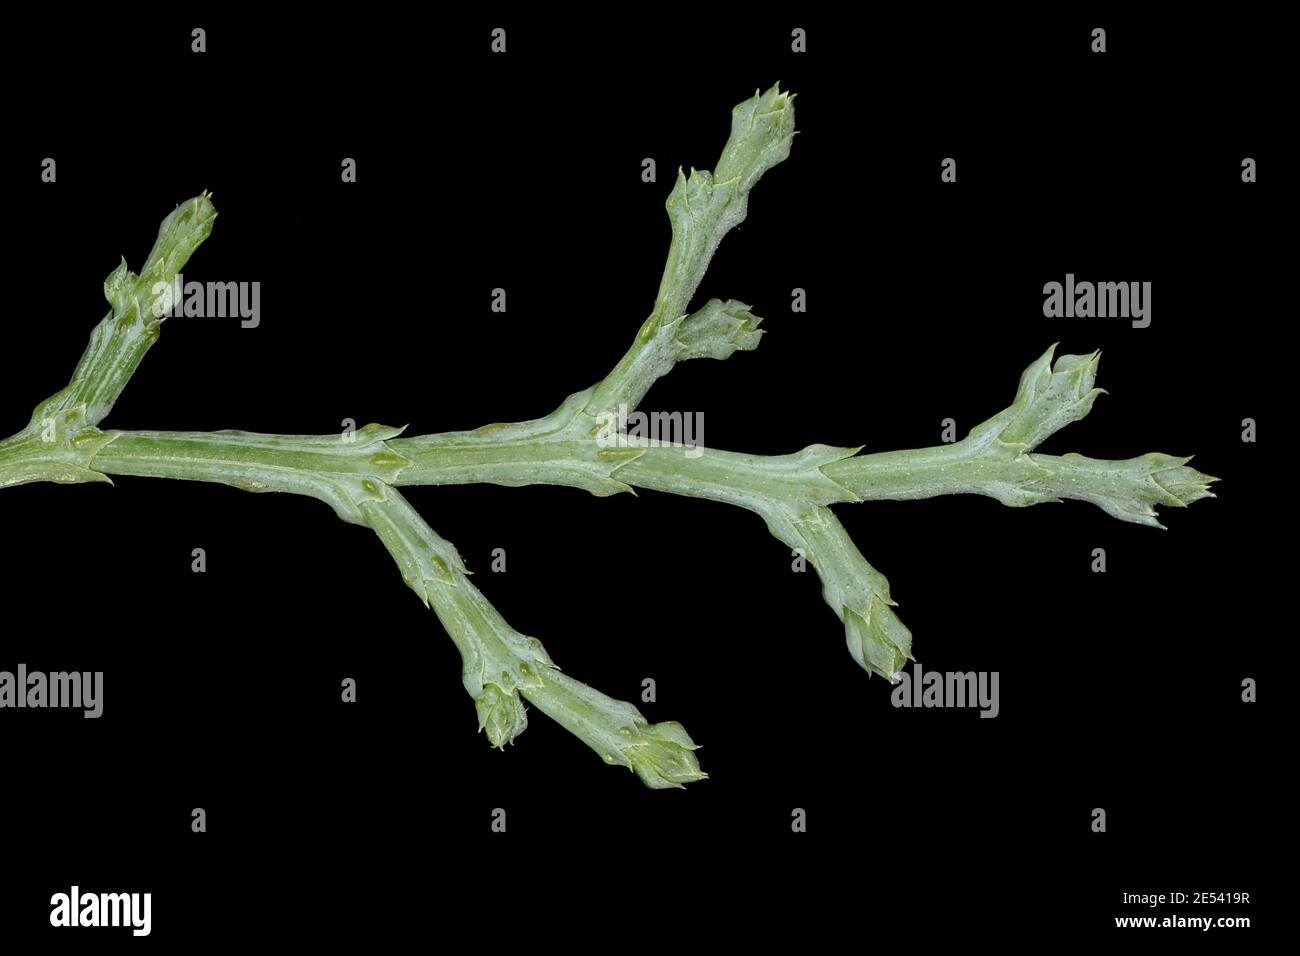 Sandarac (Tetraclinis articulata). Closeup of a Shoot with Scale Leaves Stock Photo